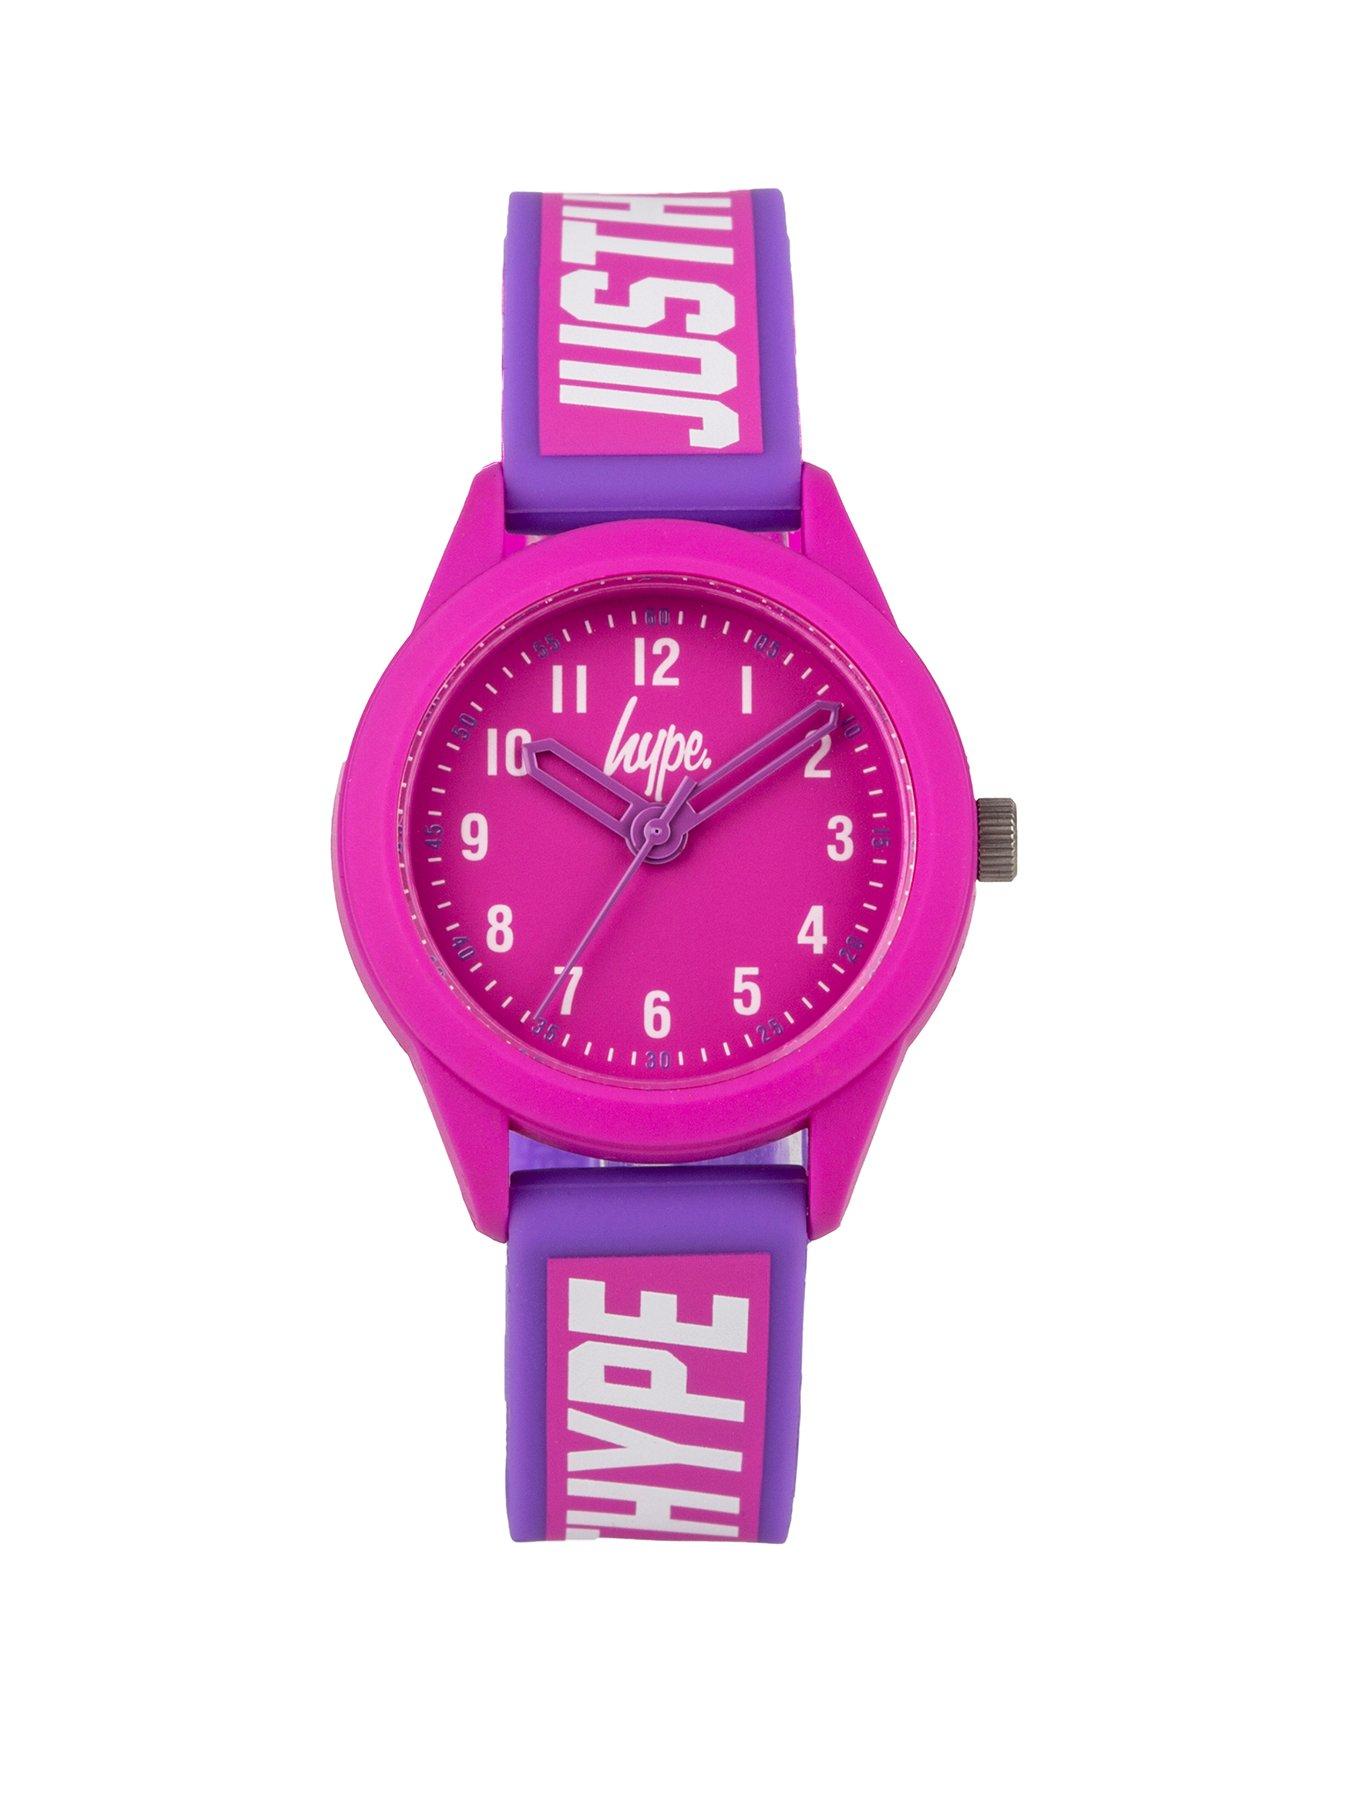 Kids Hype Kids Pink with White 'Just Hype' Branding Silicone Strap with Pink Dial